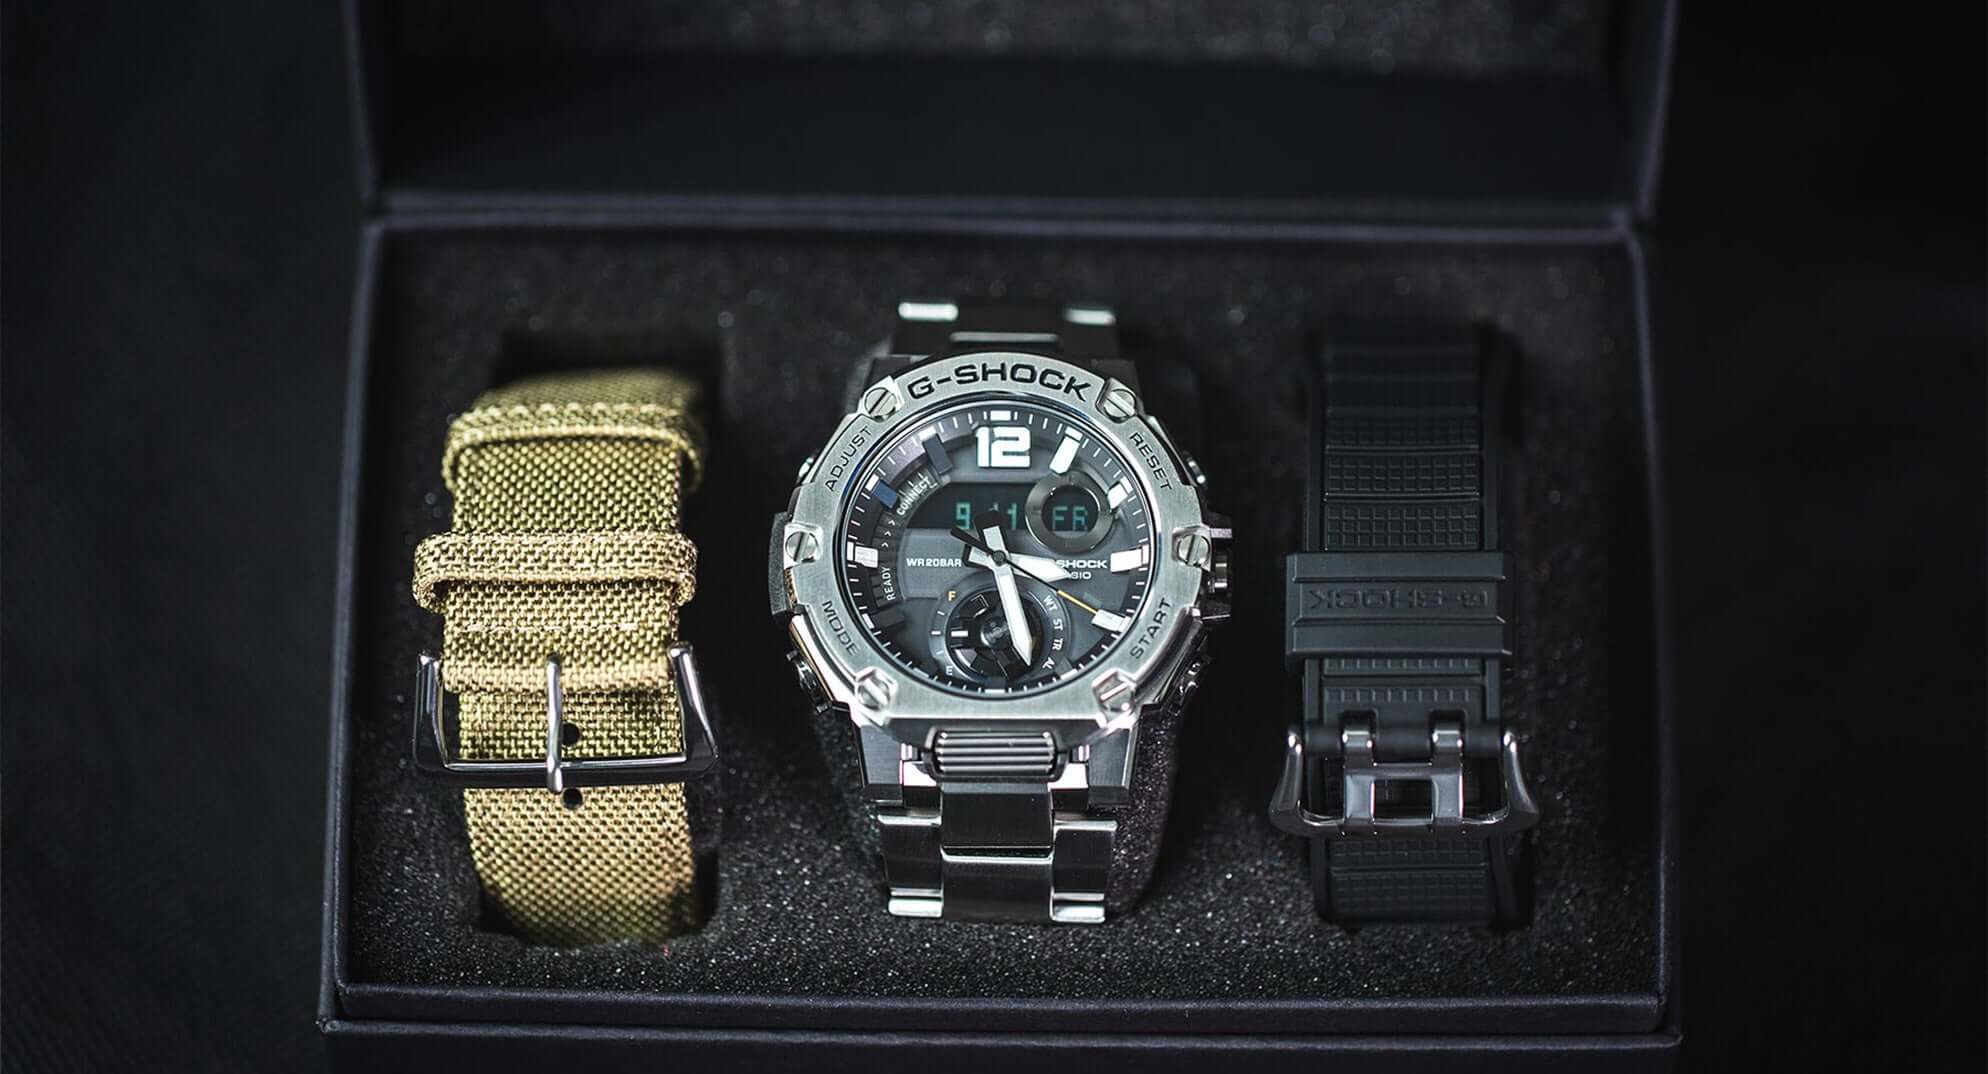 7 Reasons To Own The G-Shock G-Steel GSTB300E-5A